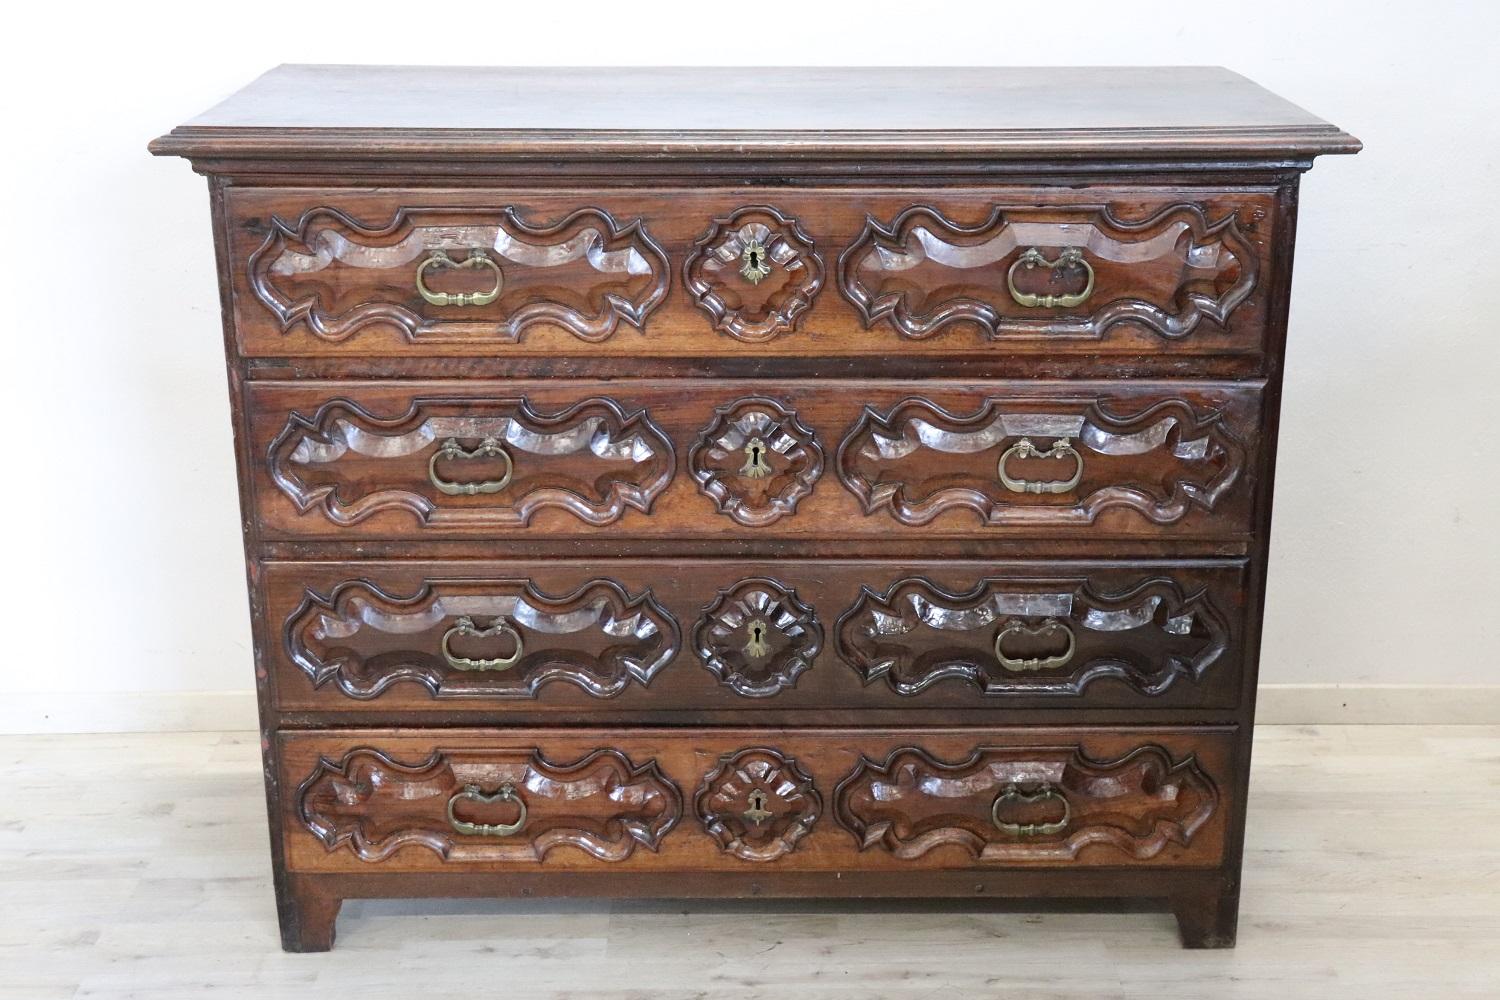 Important and rare antique Italian of the period Louis XIV chest of drawers, 1680. On the front three large and useful drawers. The first drawer has a very rare feature, the front opens to become a writing surface and internally there are eight